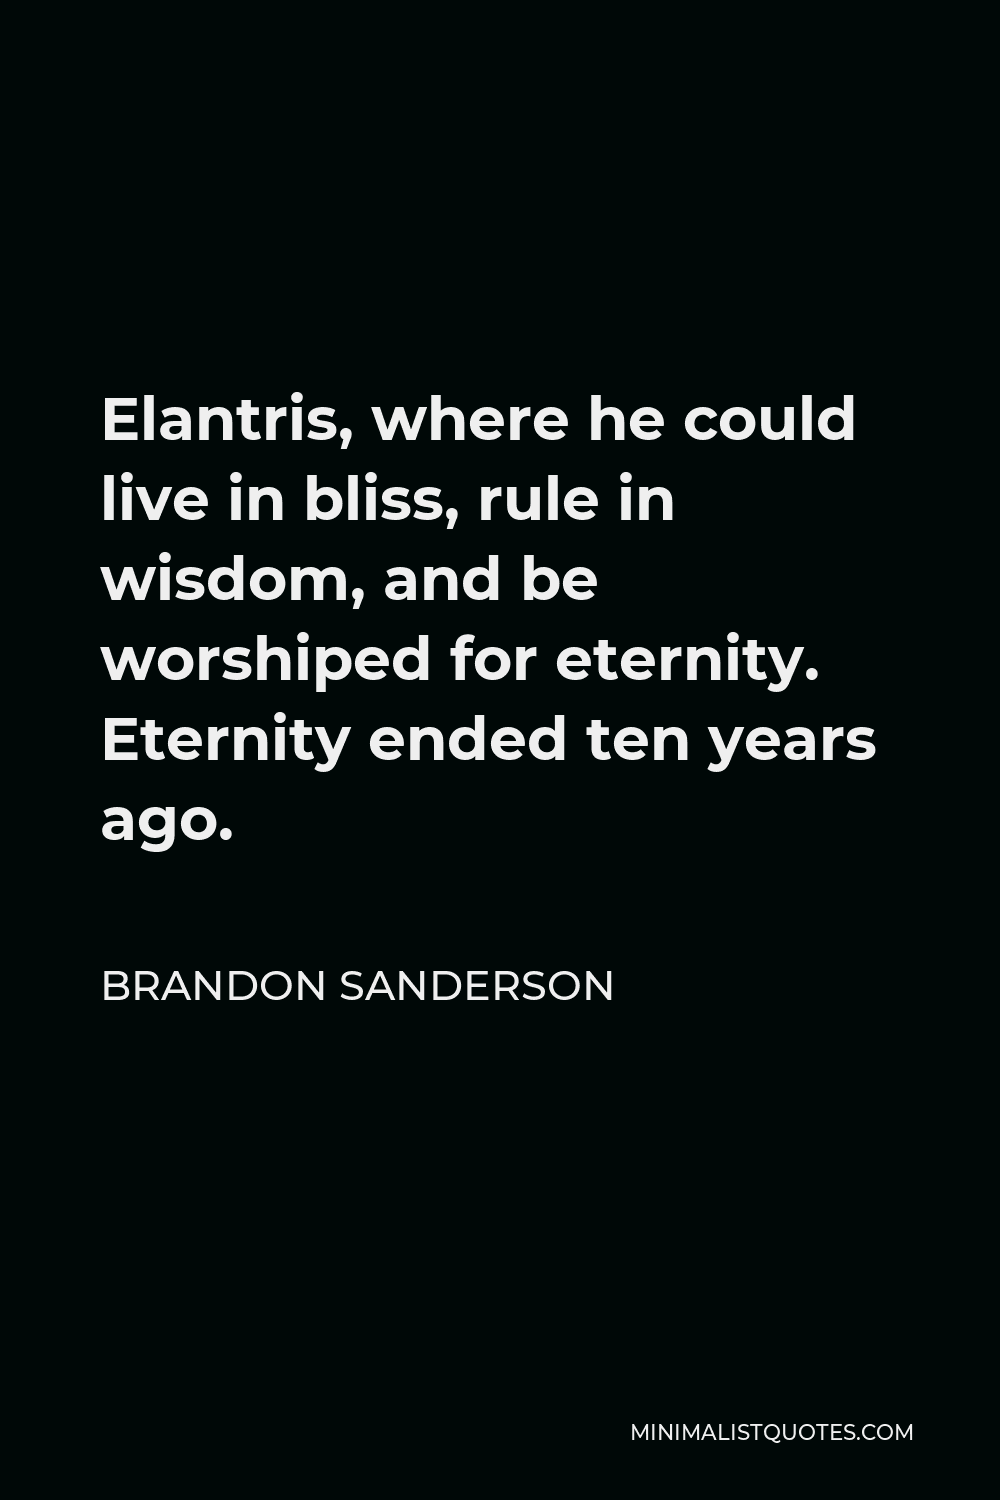 Brandon Sanderson Quote - Elantris, where he could live in bliss, rule in wisdom, and be worshiped for eternity. Eternity ended ten years ago.